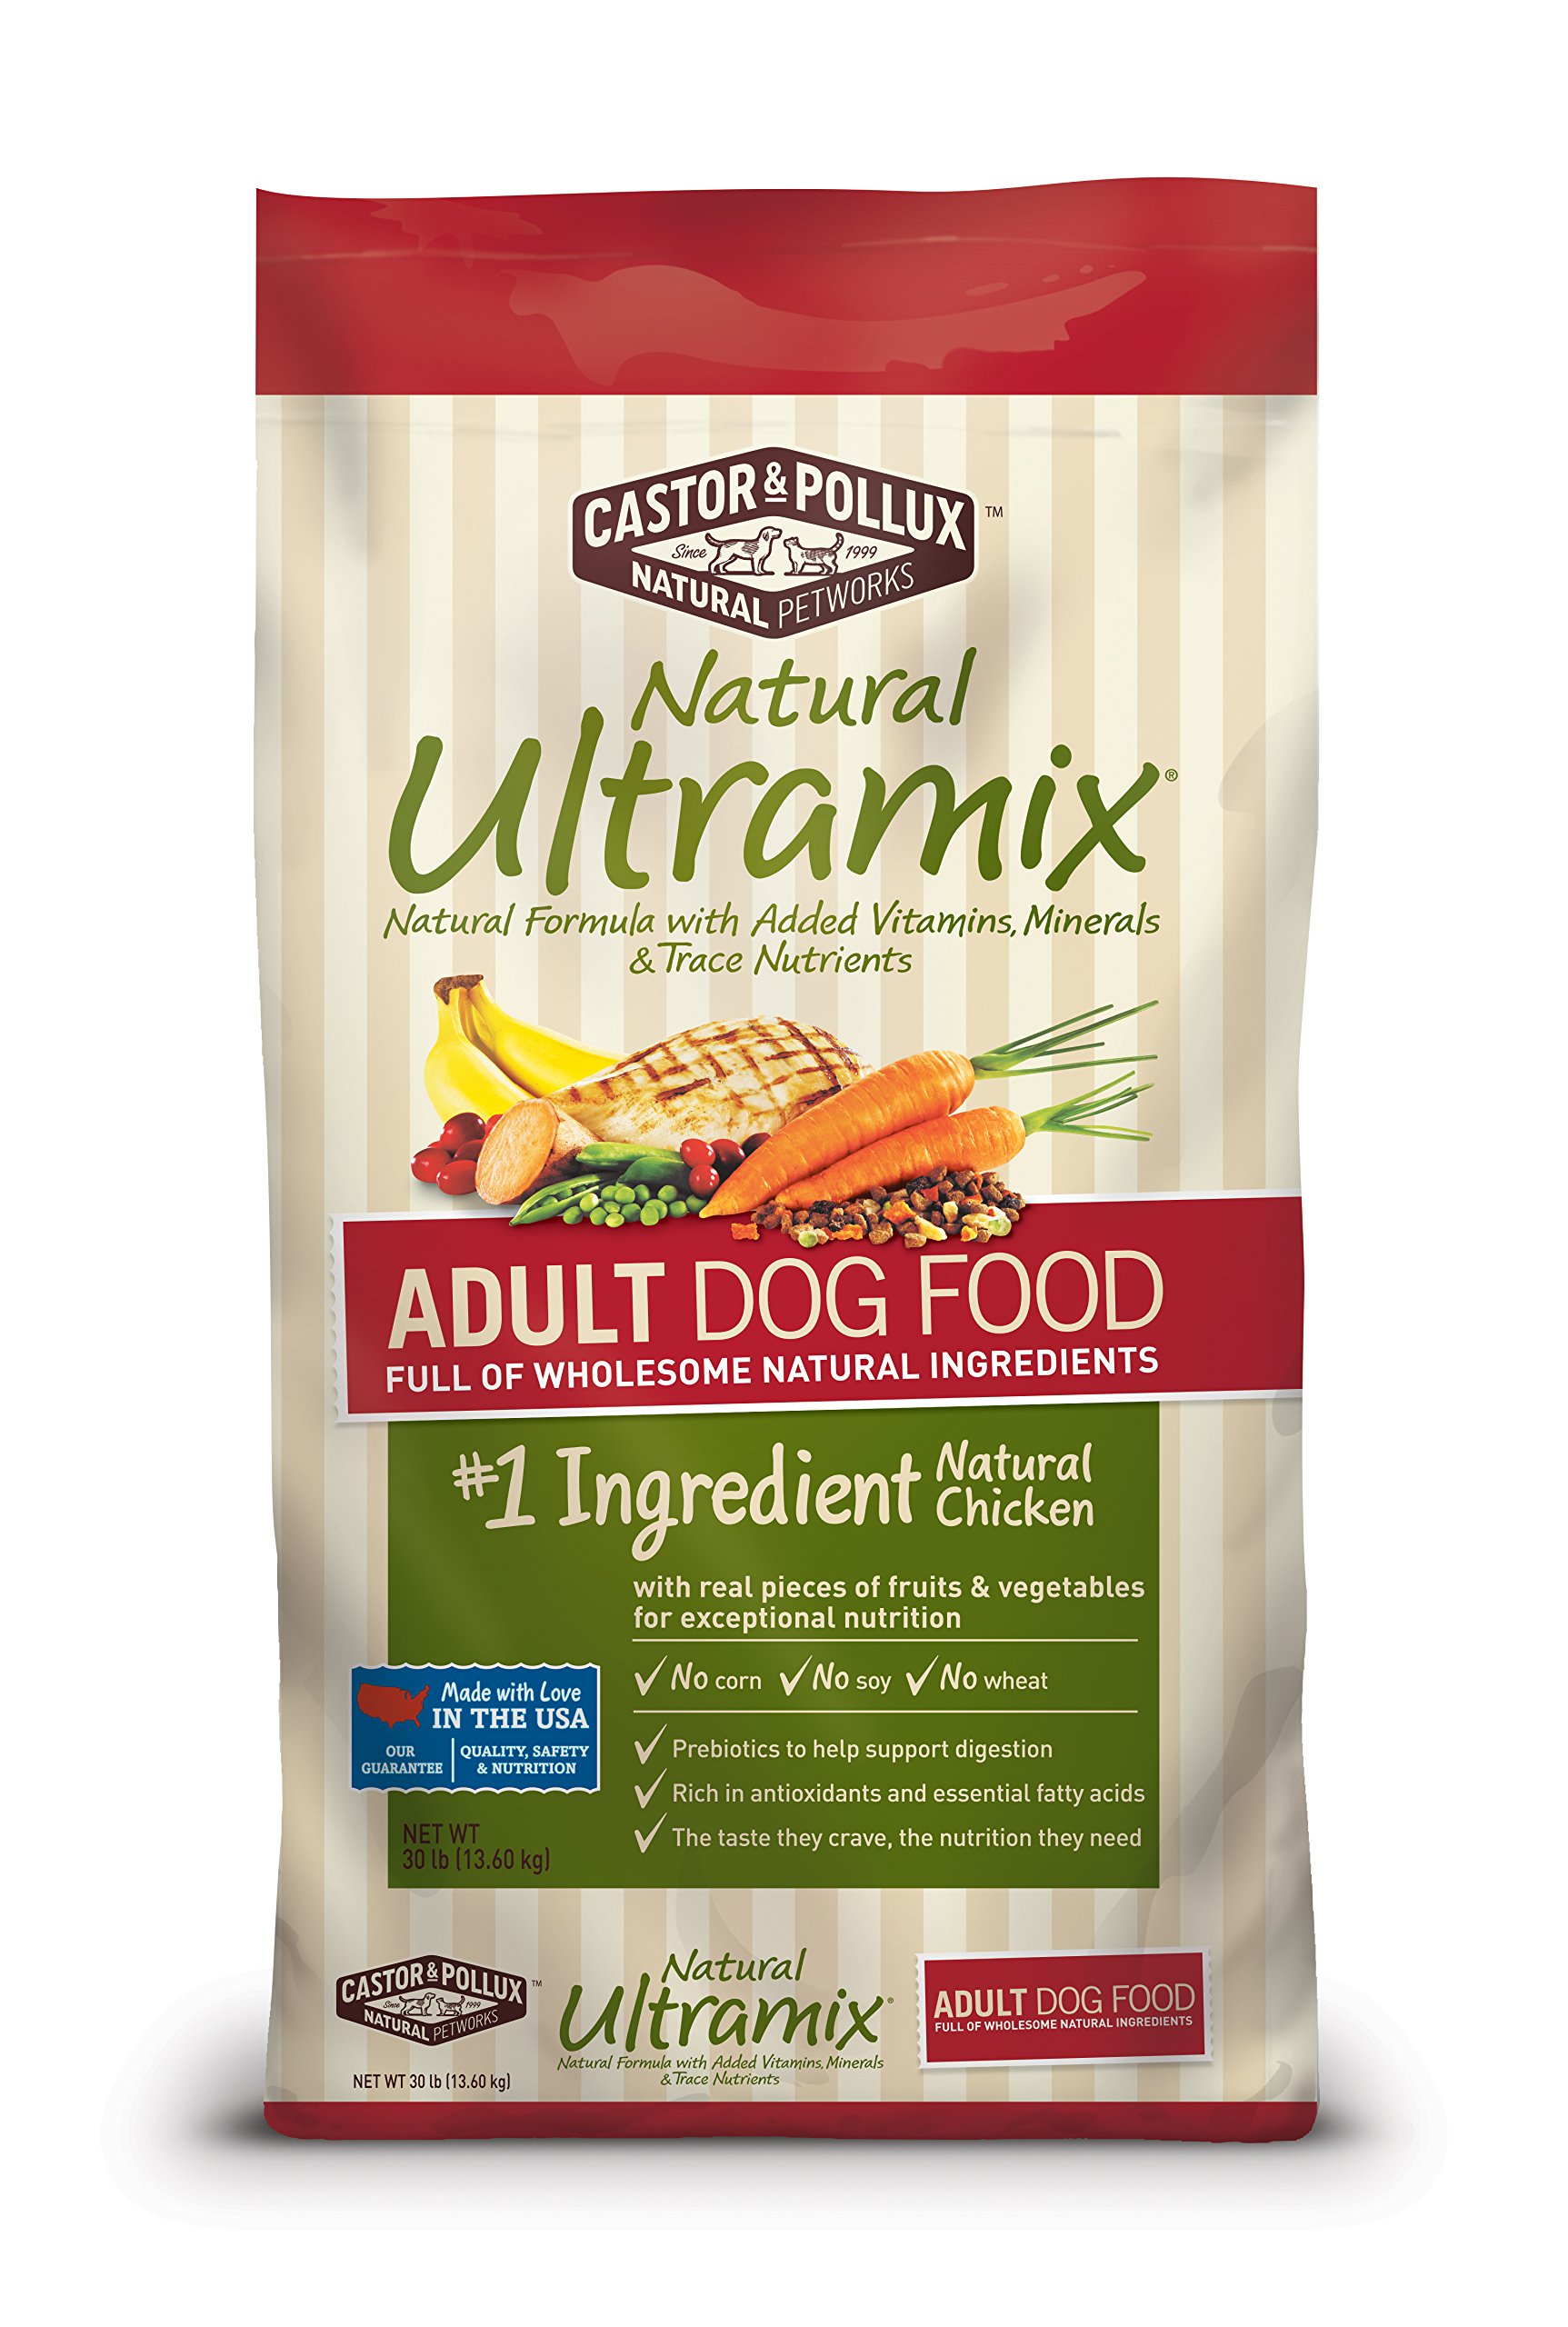 11 Top Affordable Organic and Natural Dog Foods of 2019